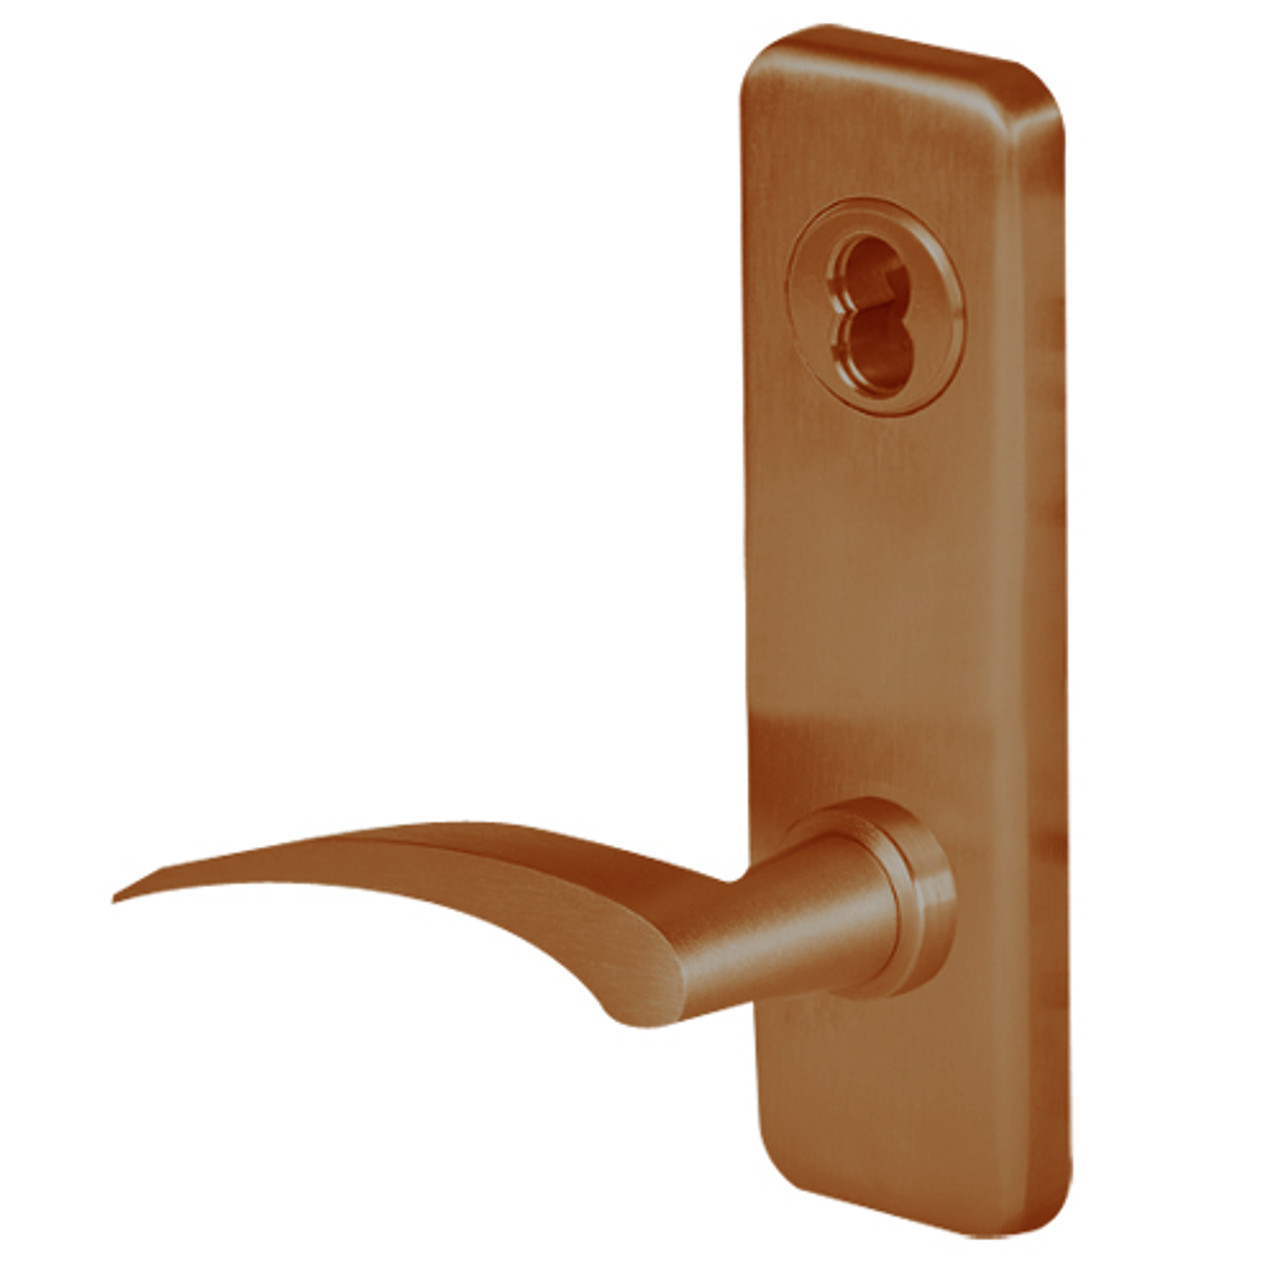 45H0L17RJ690 Best 40H Series Privacy with Deadbolt Heavy Duty Mortise Lever Lock with Gull Wing RH in Dark Bronze